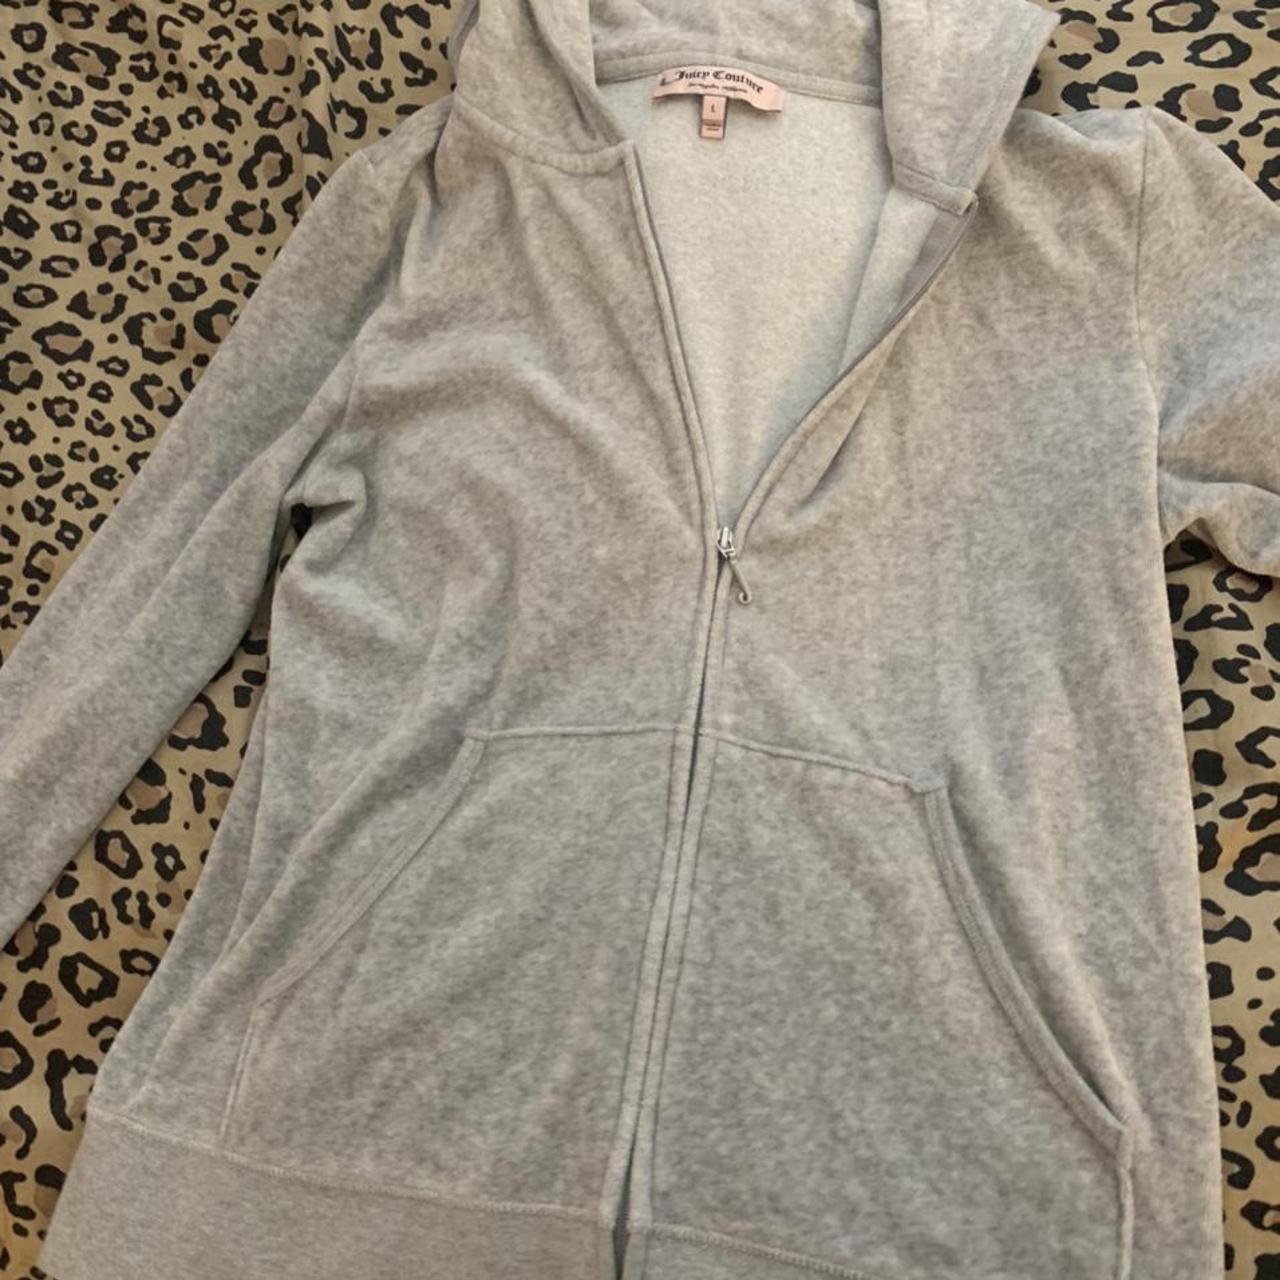 Grey juicy couture zip up. Size large but runs a... - Depop